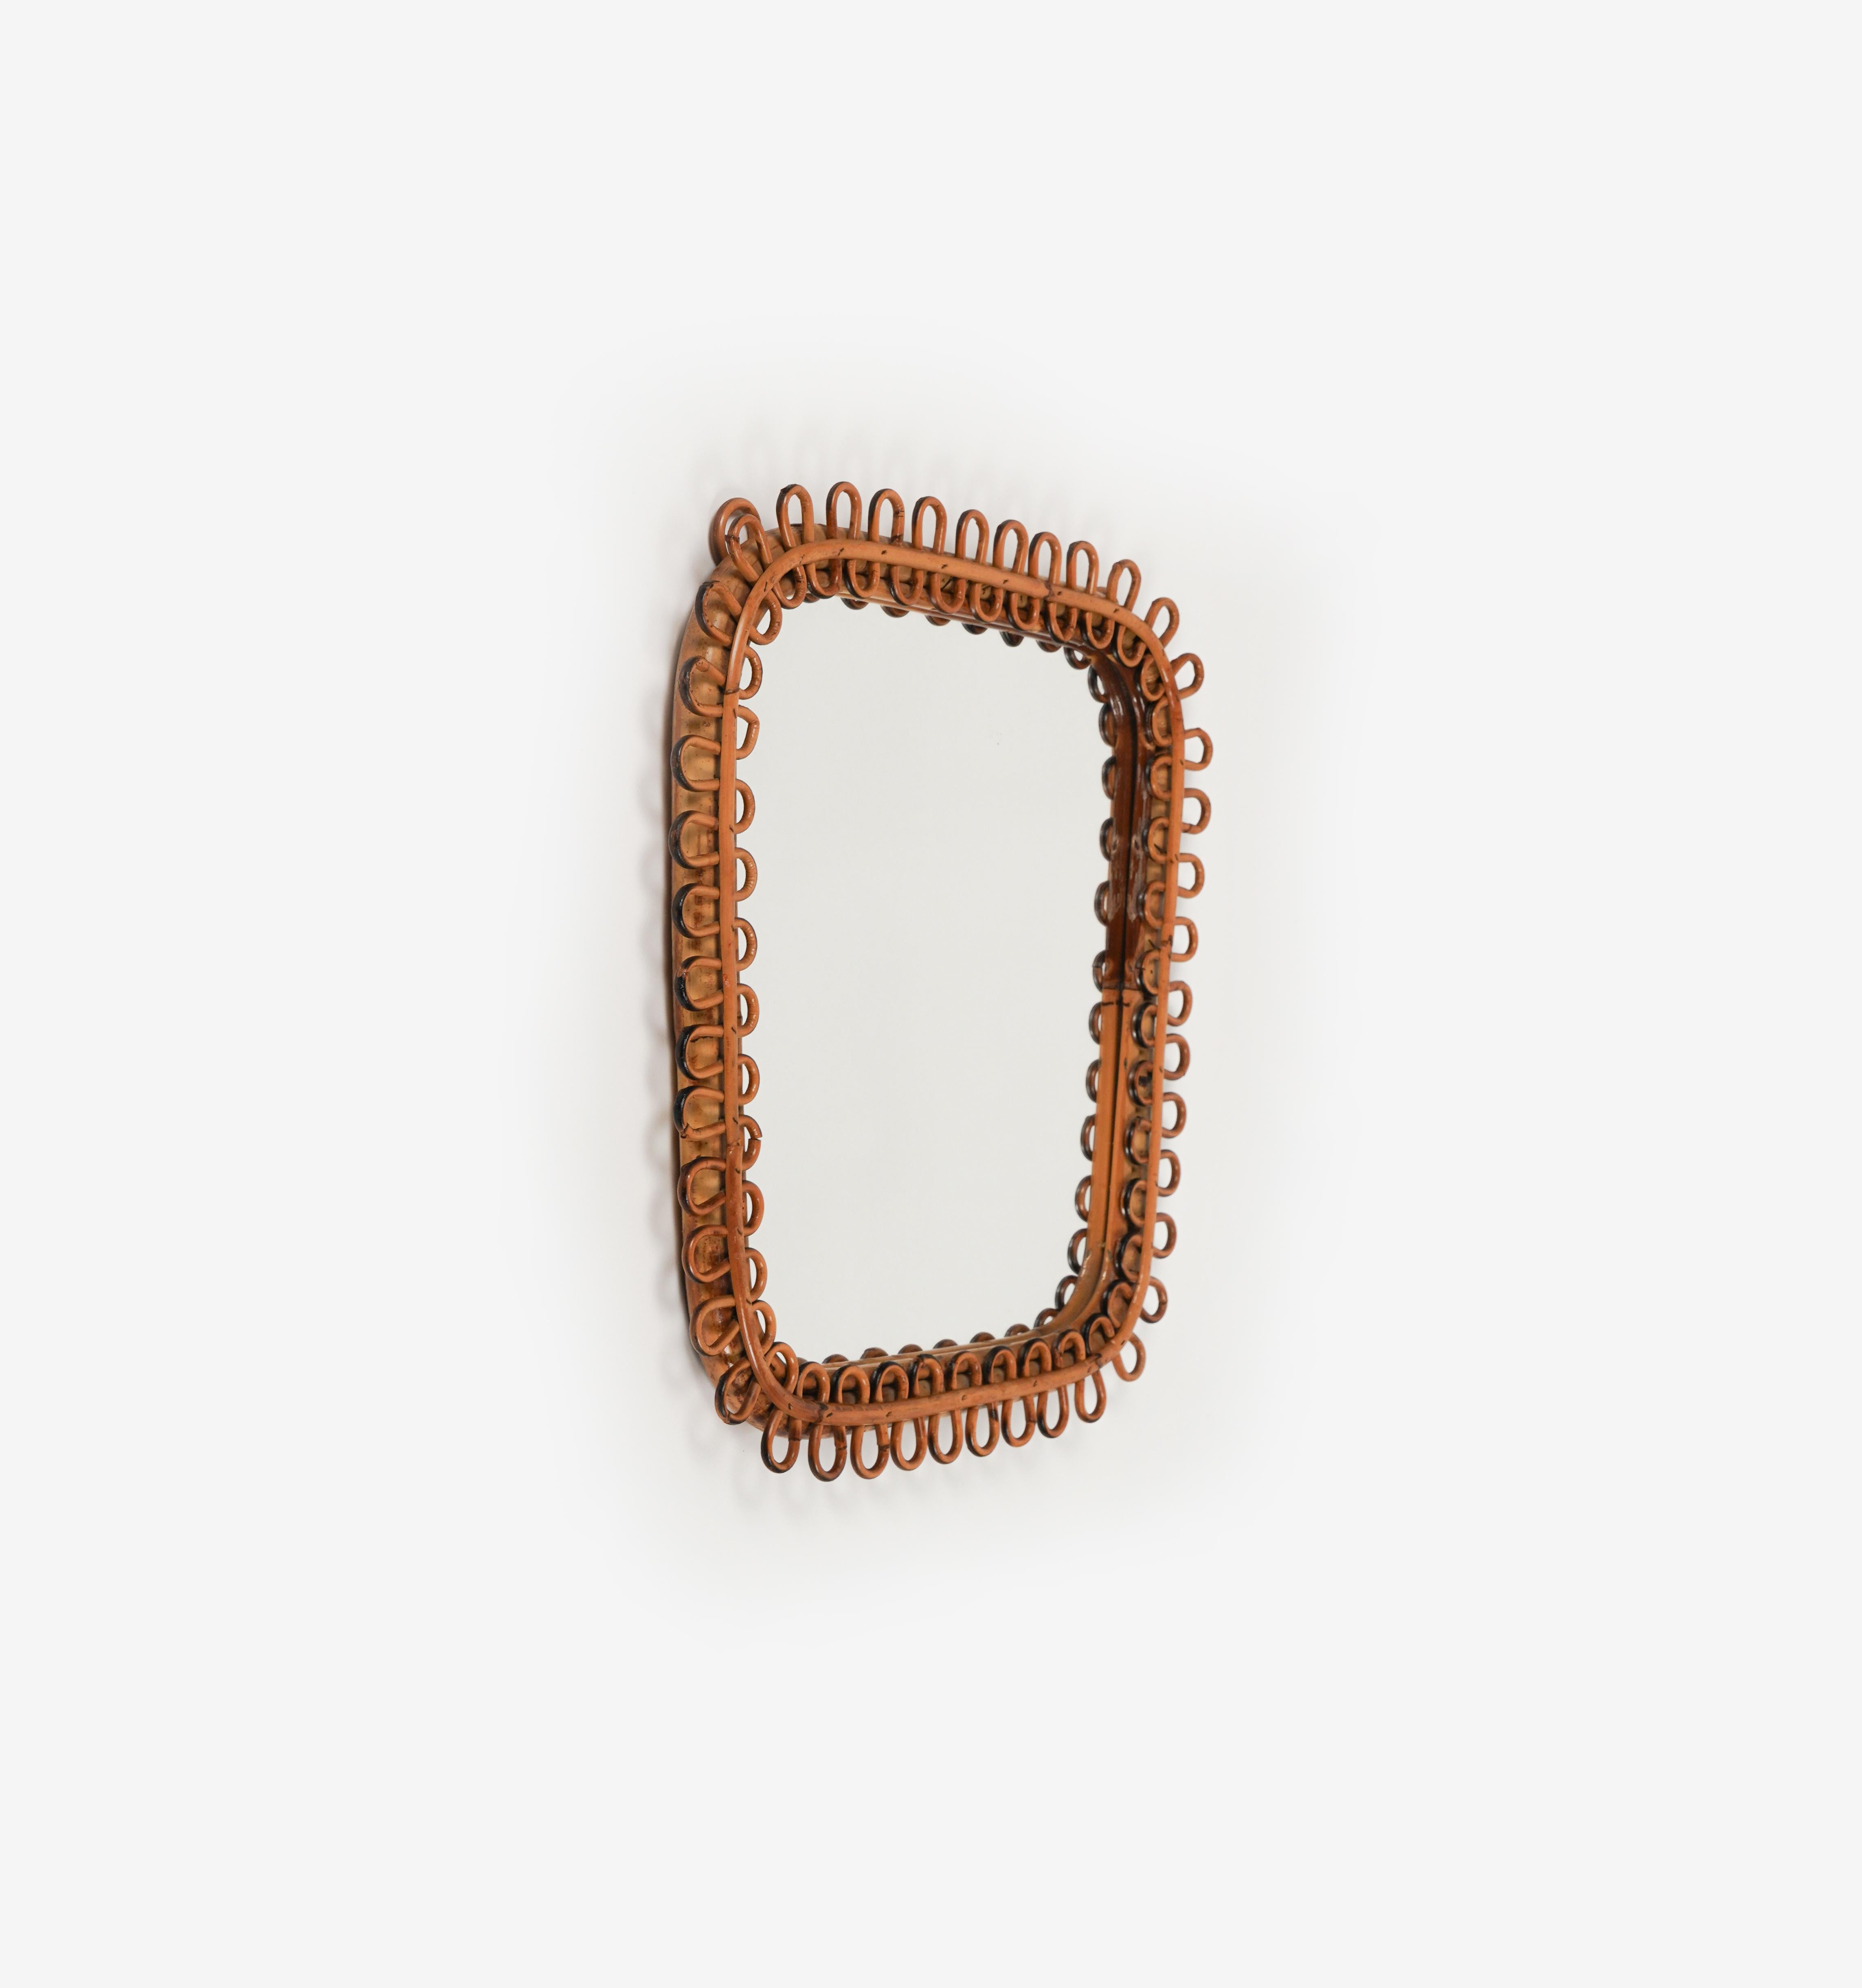 Midcentury beautiful square wall mirror framed by bamboo and rattan in the style of Franco Albini.

A highly decorative mirror with undulated rattan frame.

Made in Italy in the 1960s.

